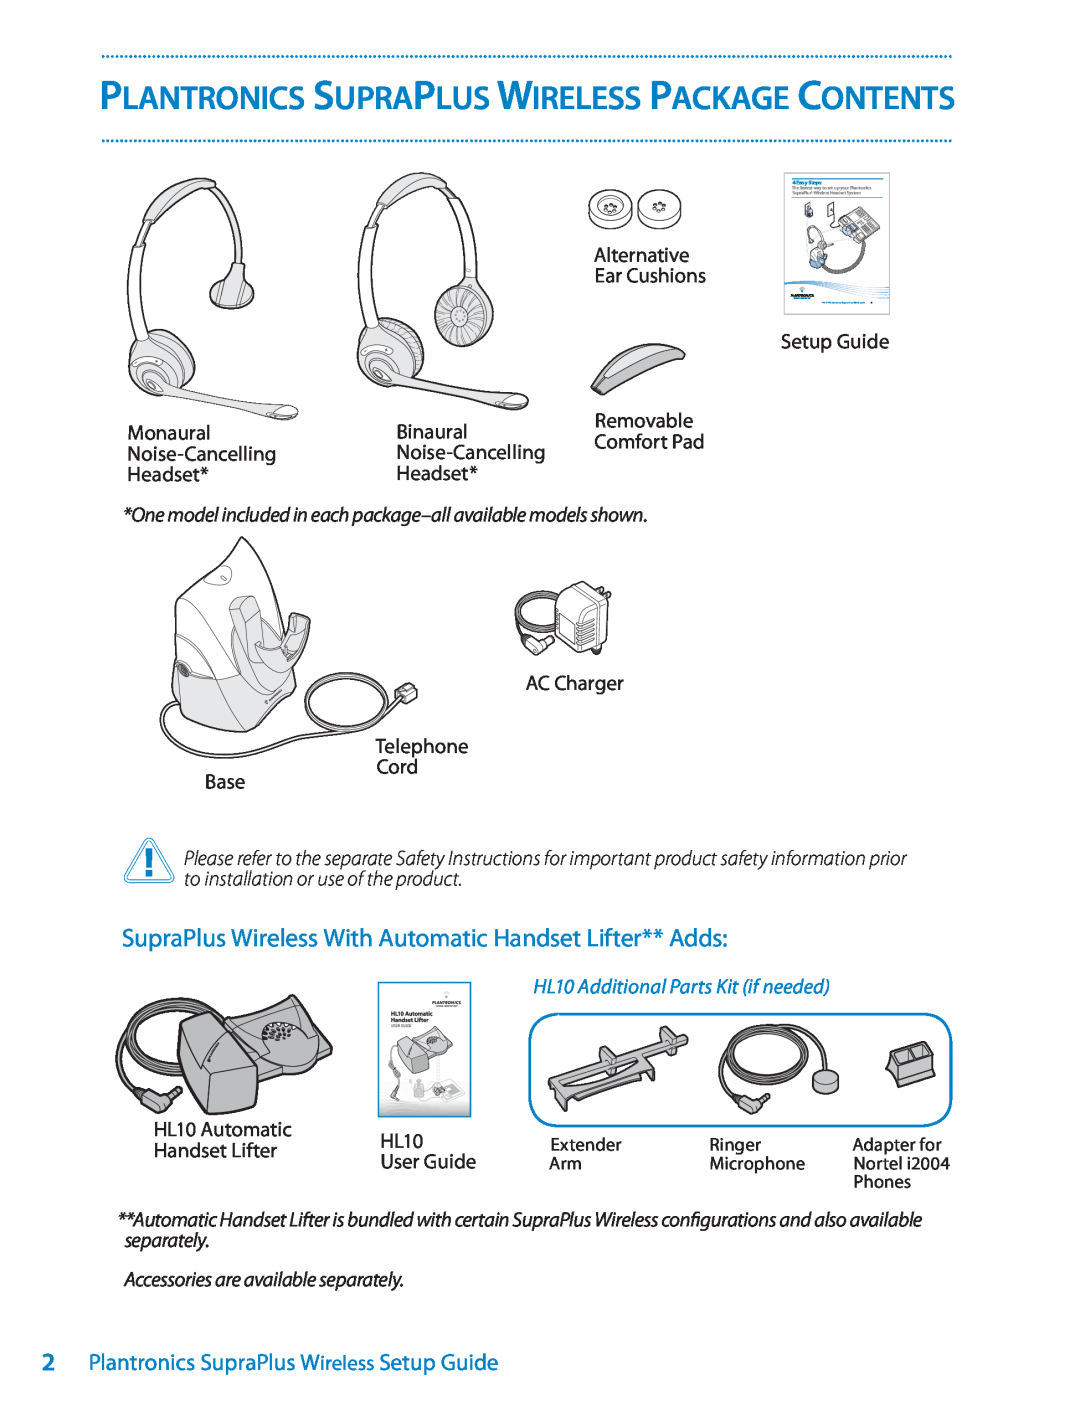 Univex Wireless Headset System 2Plantronics SupraPlus Wireless Setup Guide, Accessories are available separately 